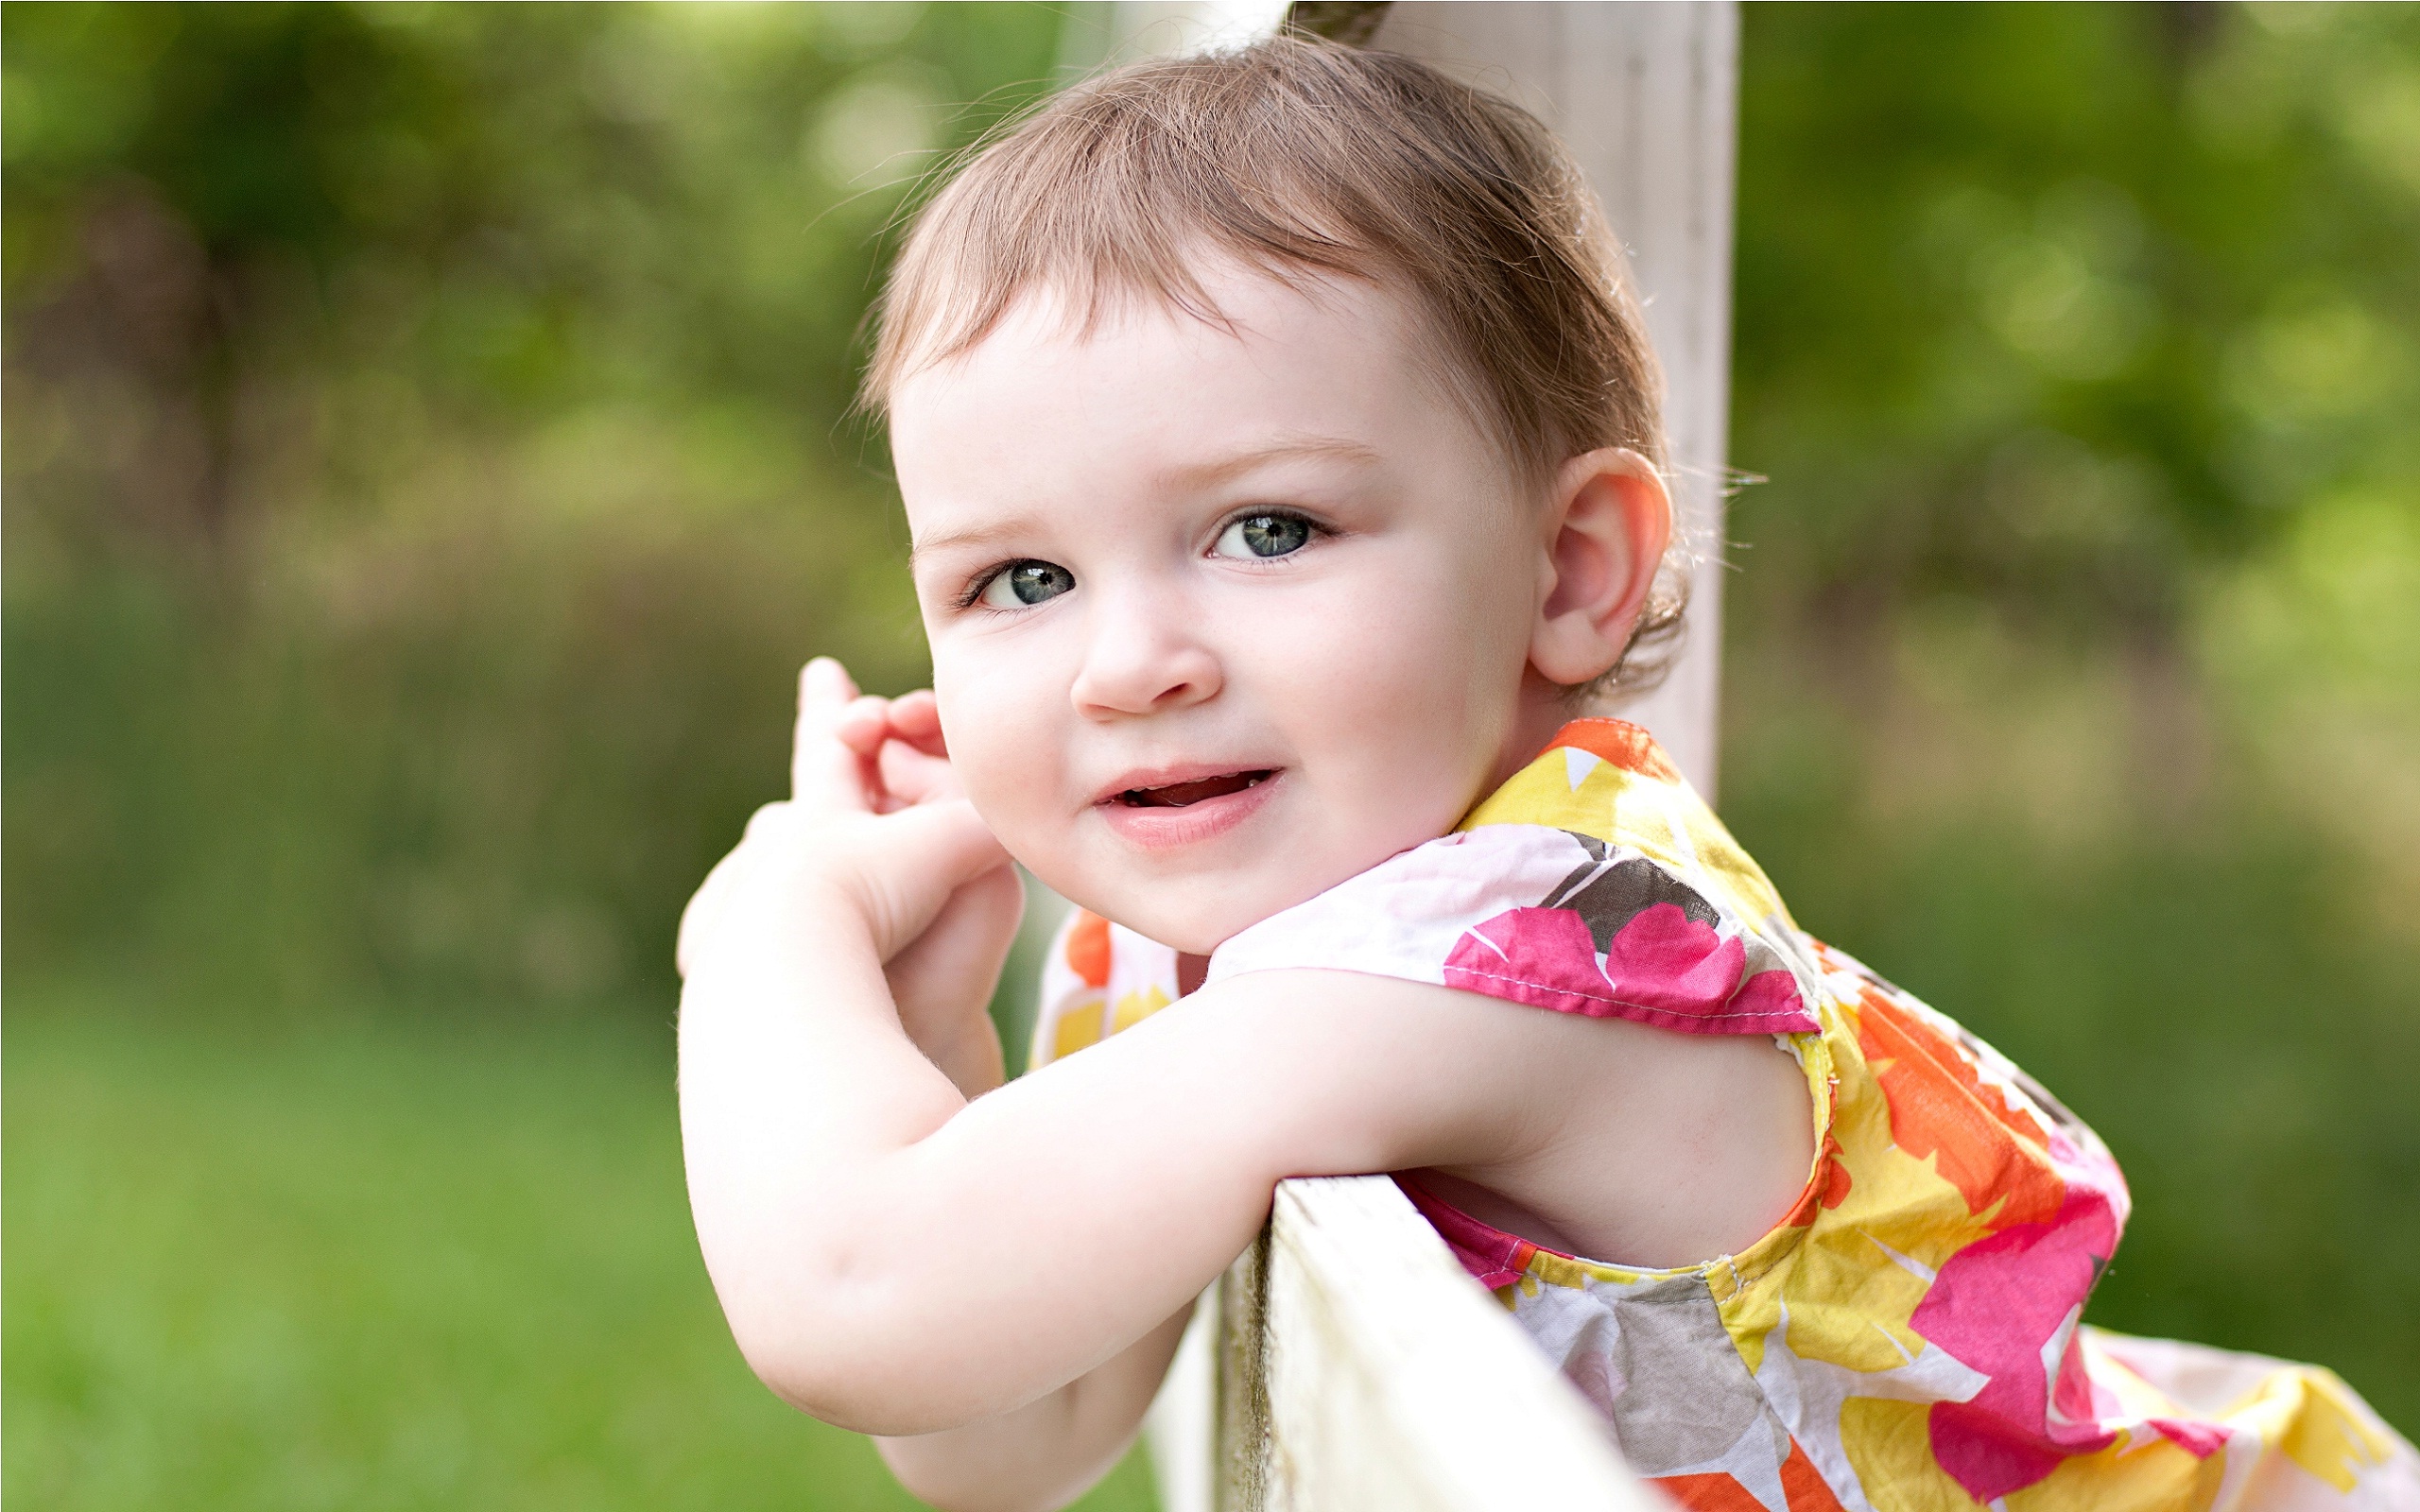 Smiling cute baby high quality widescreen